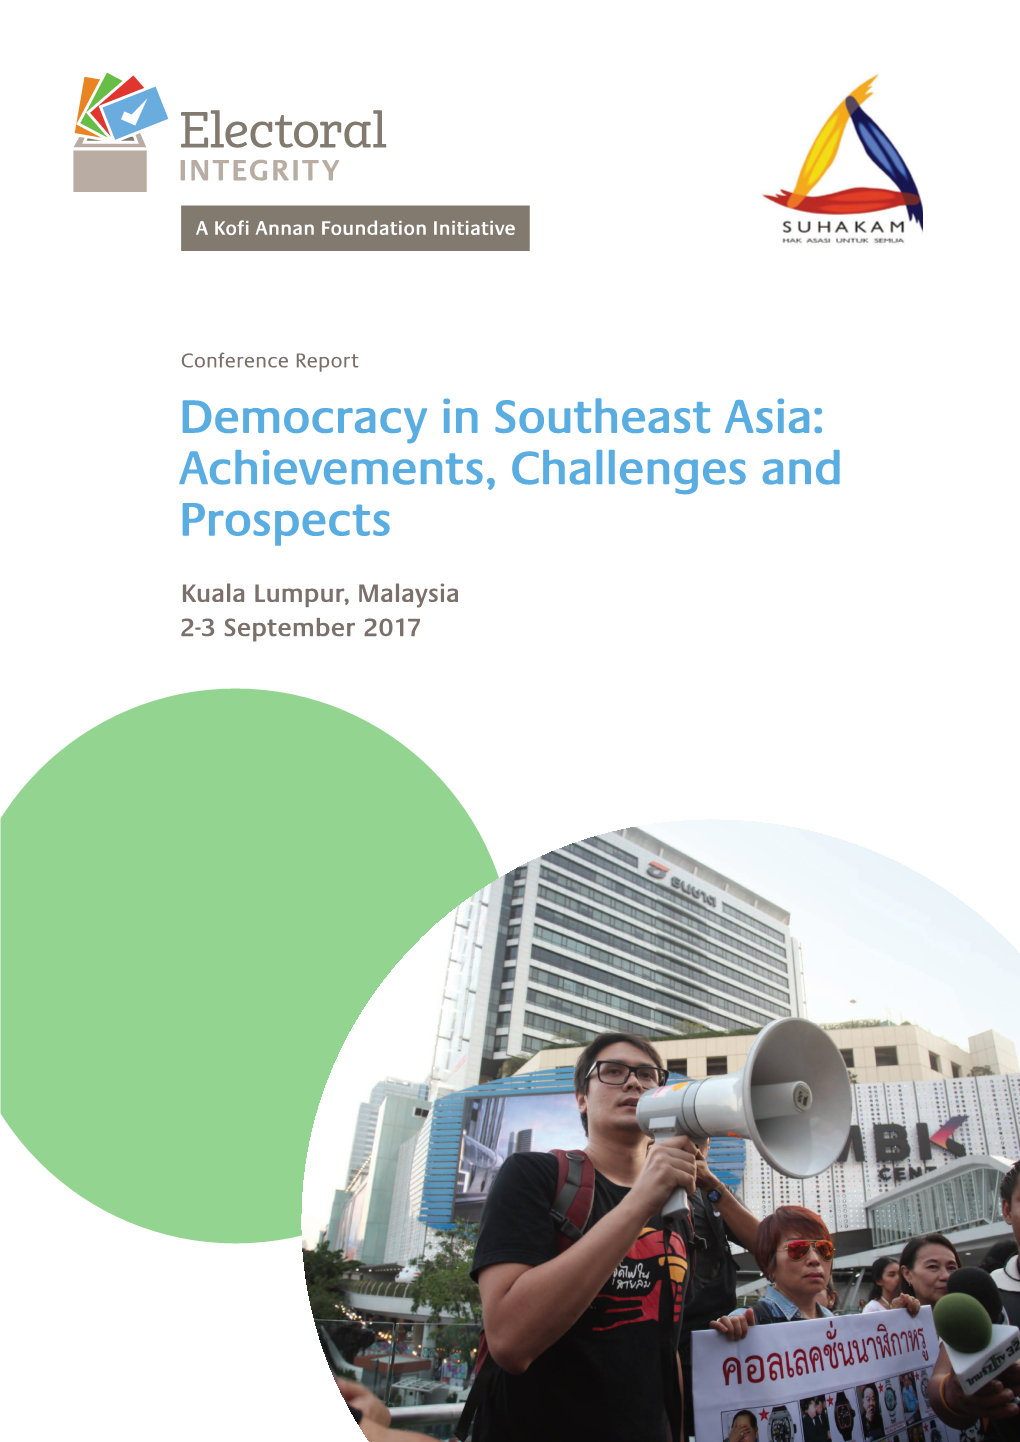 Democracy in Southeast Asia: Achievements, Challenges and Prospects